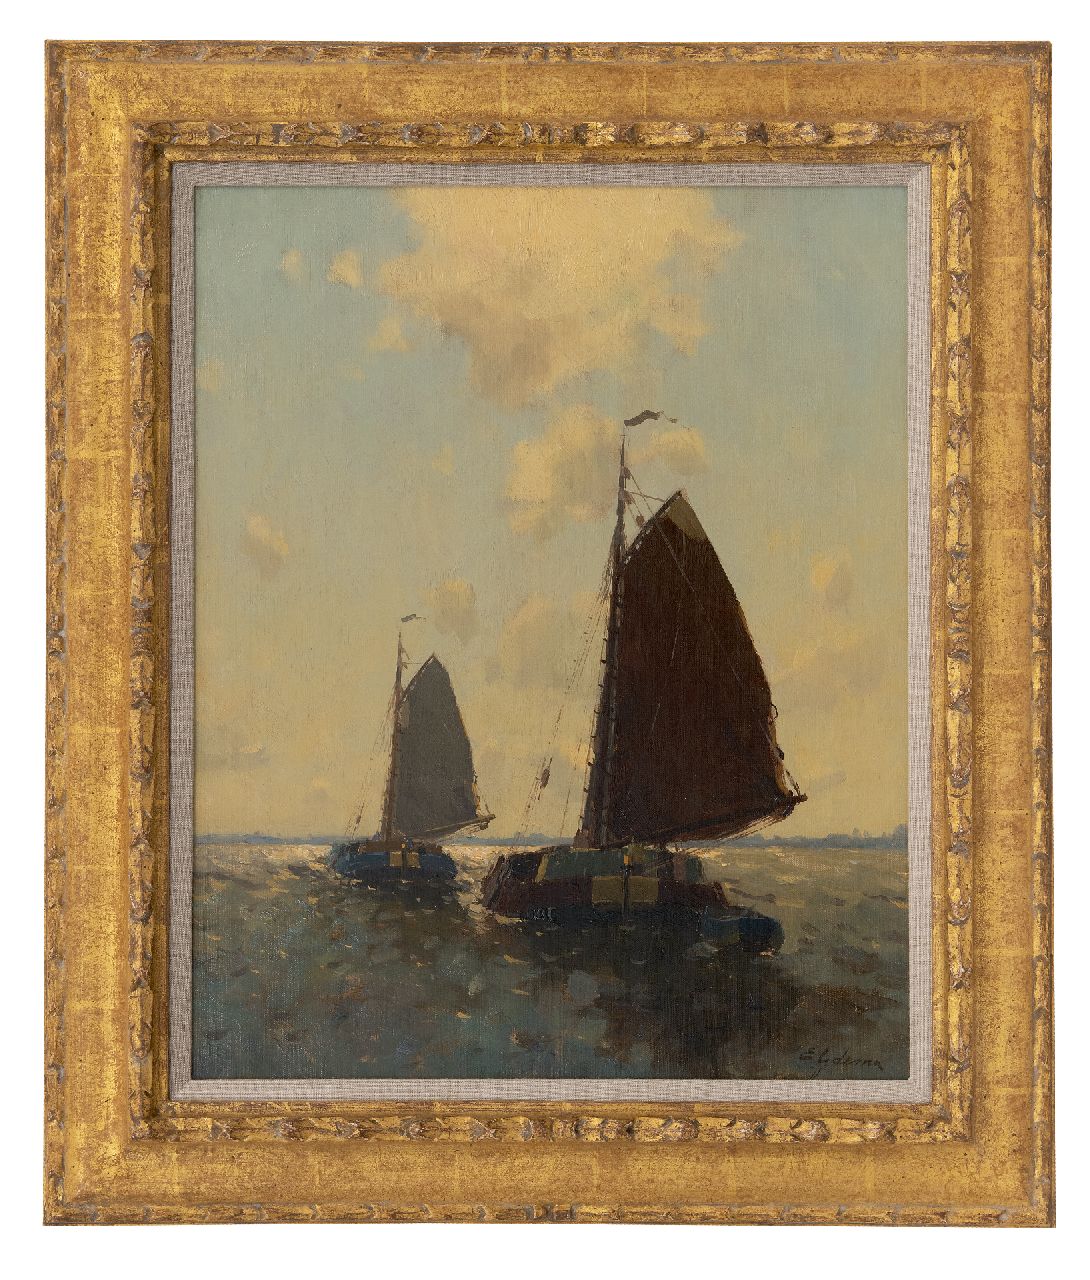 Ydema E.  | Egnatius Ydema | Paintings offered for sale | Barges sailing on the lake, oil on canvas 50.3 x 40.4 cm, signed l.r.